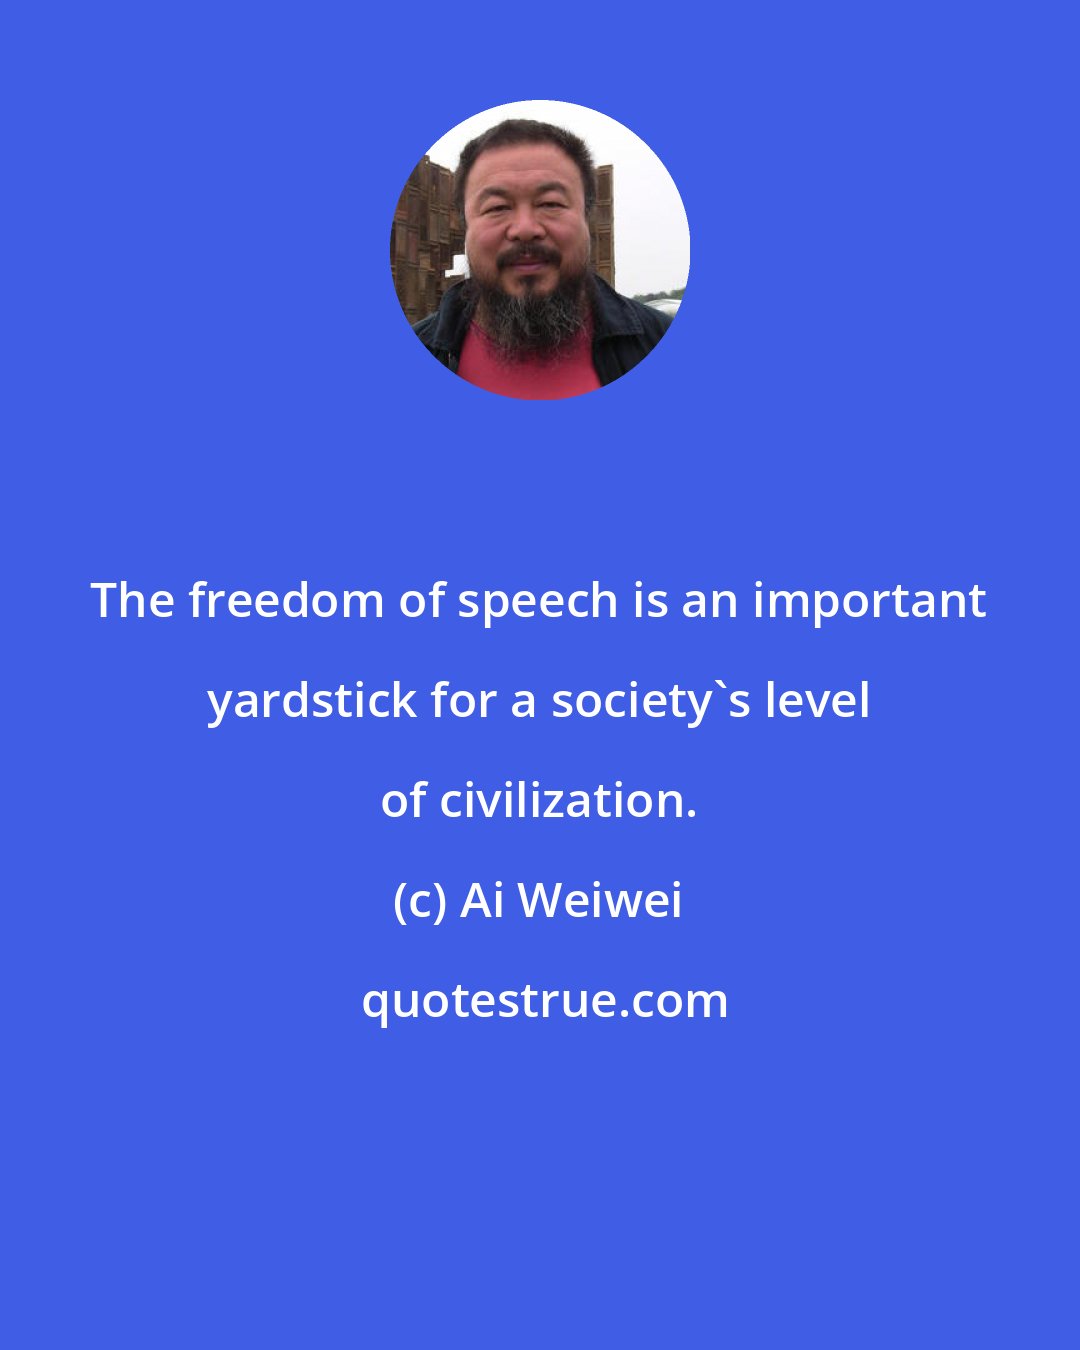 Ai Weiwei: The freedom of speech is an important yardstick for a society's level of civilization.